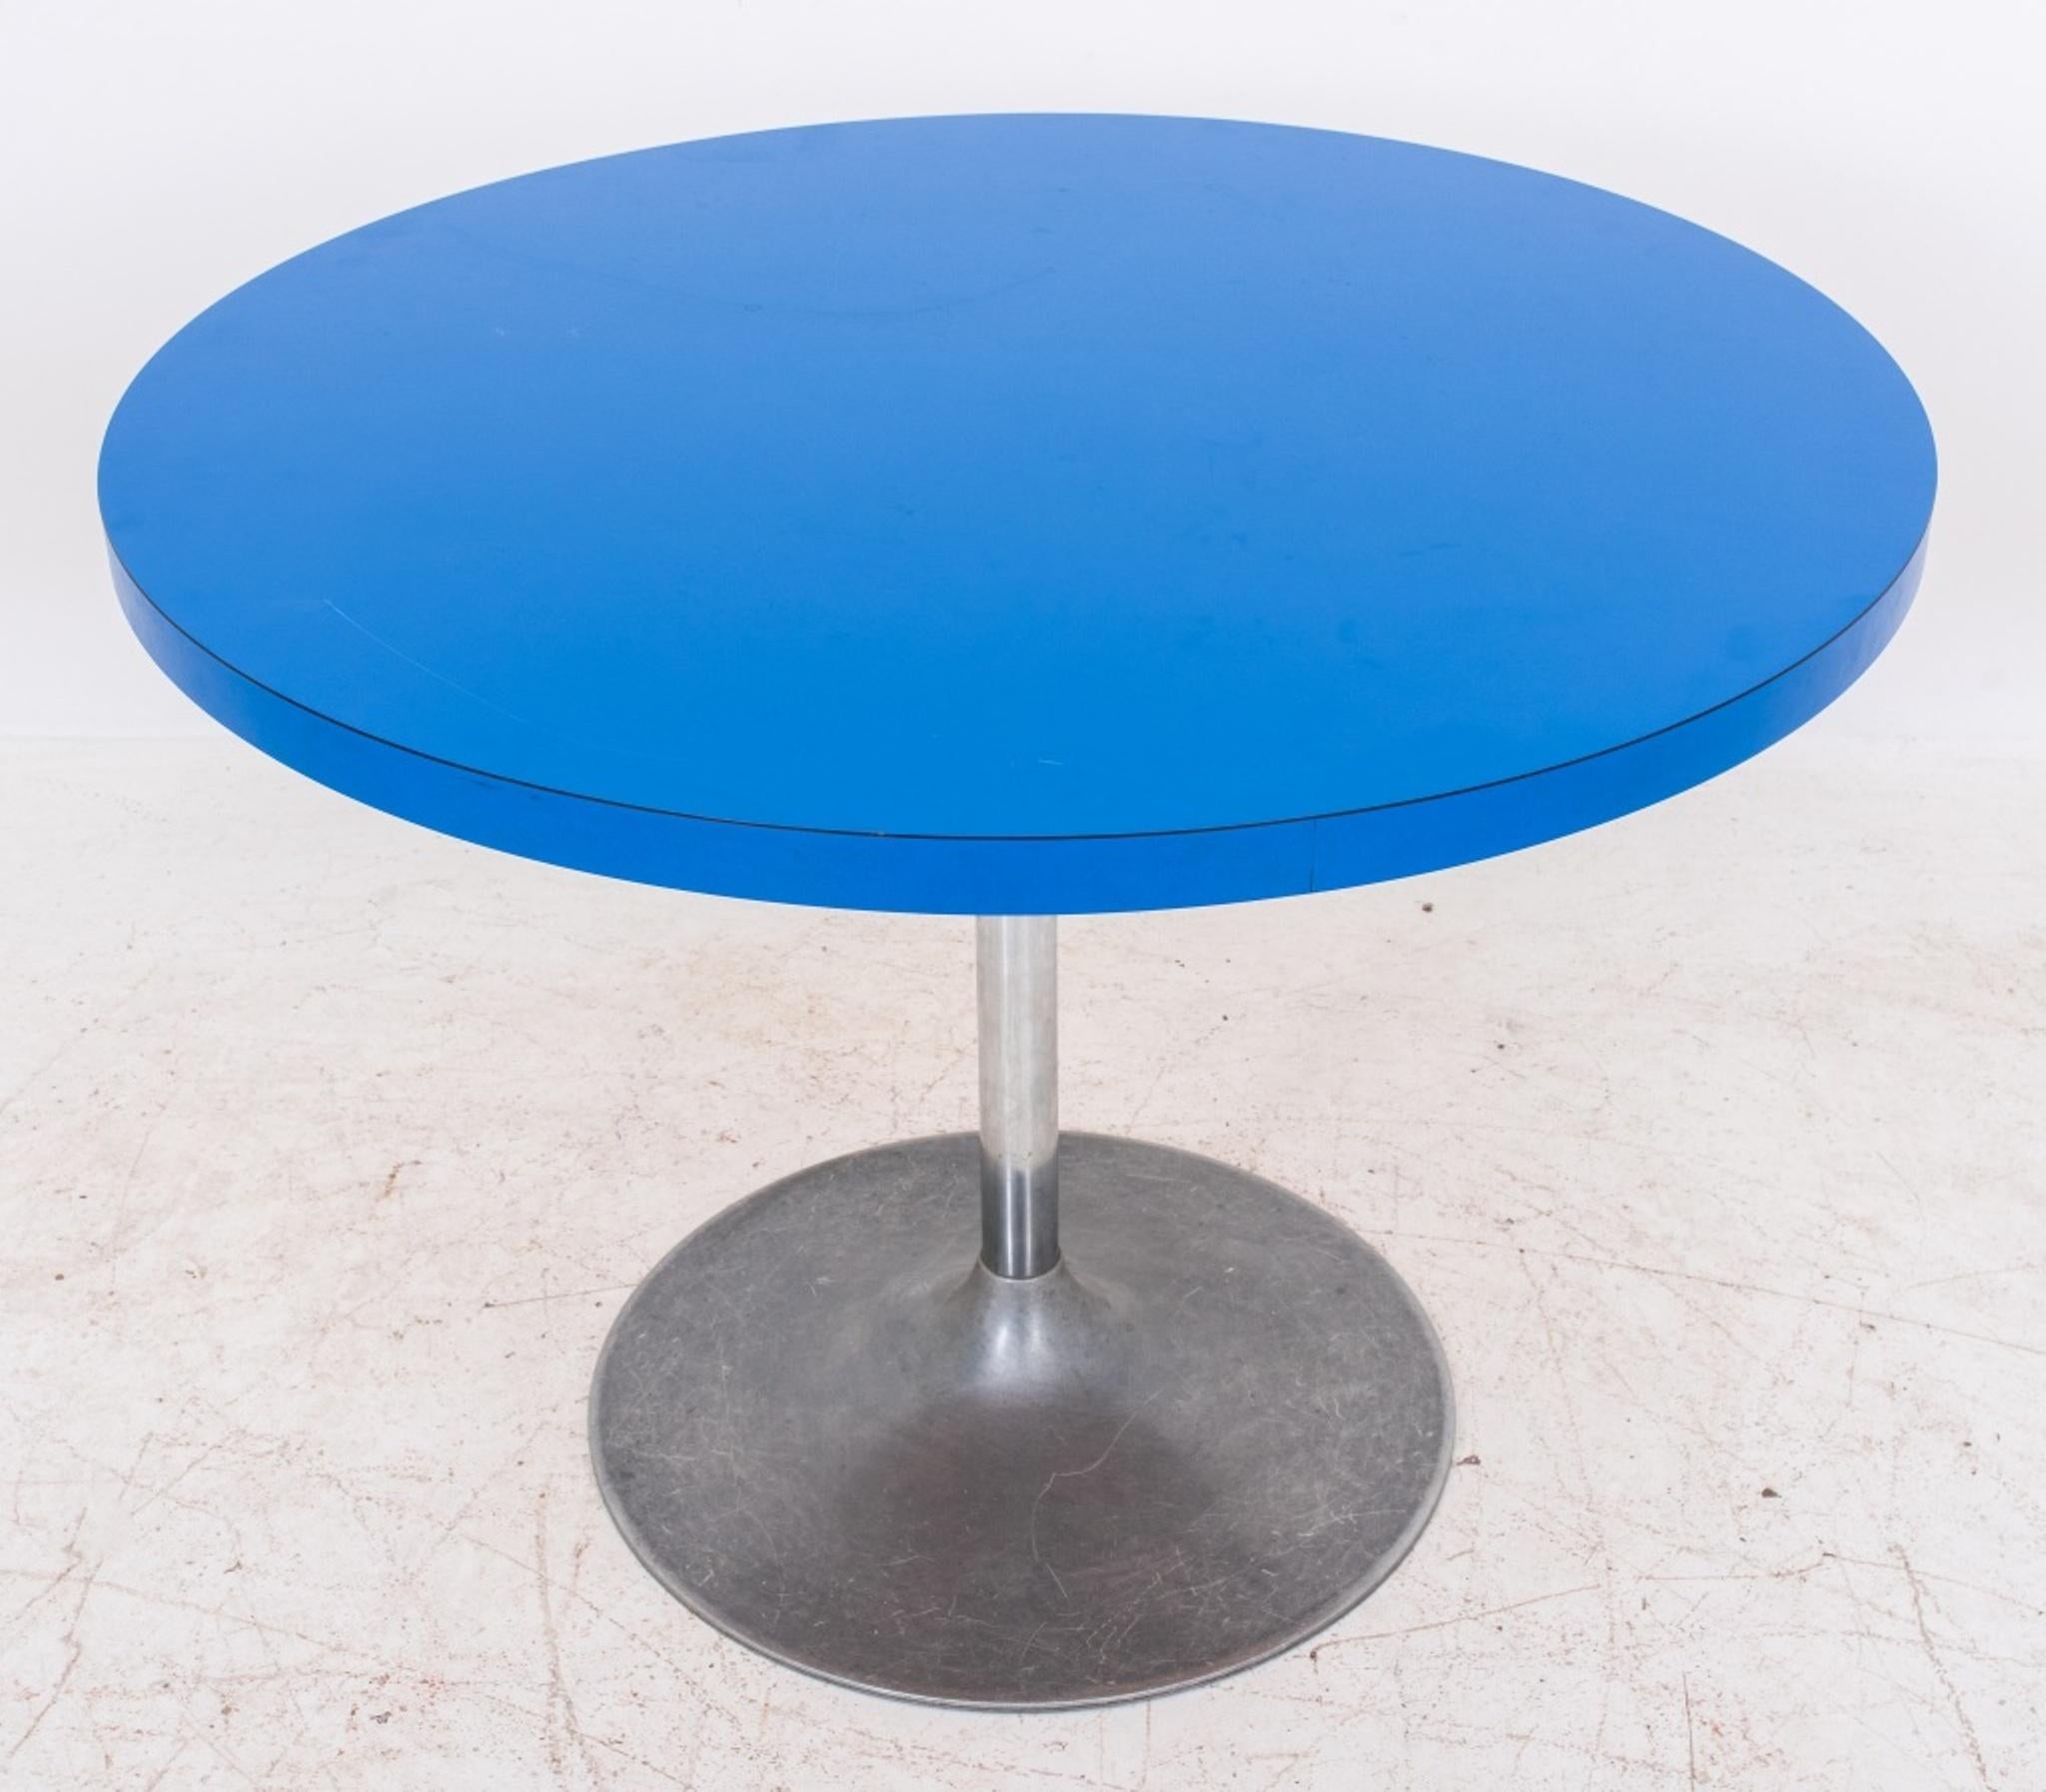 Midcentury modern chrome pedestal table, with chromed central support beneath a round blue formica top in the manner of Florence Knoll (American, 1917 - 2019).  In very good vintage condition. 

Dealer: S138XX 